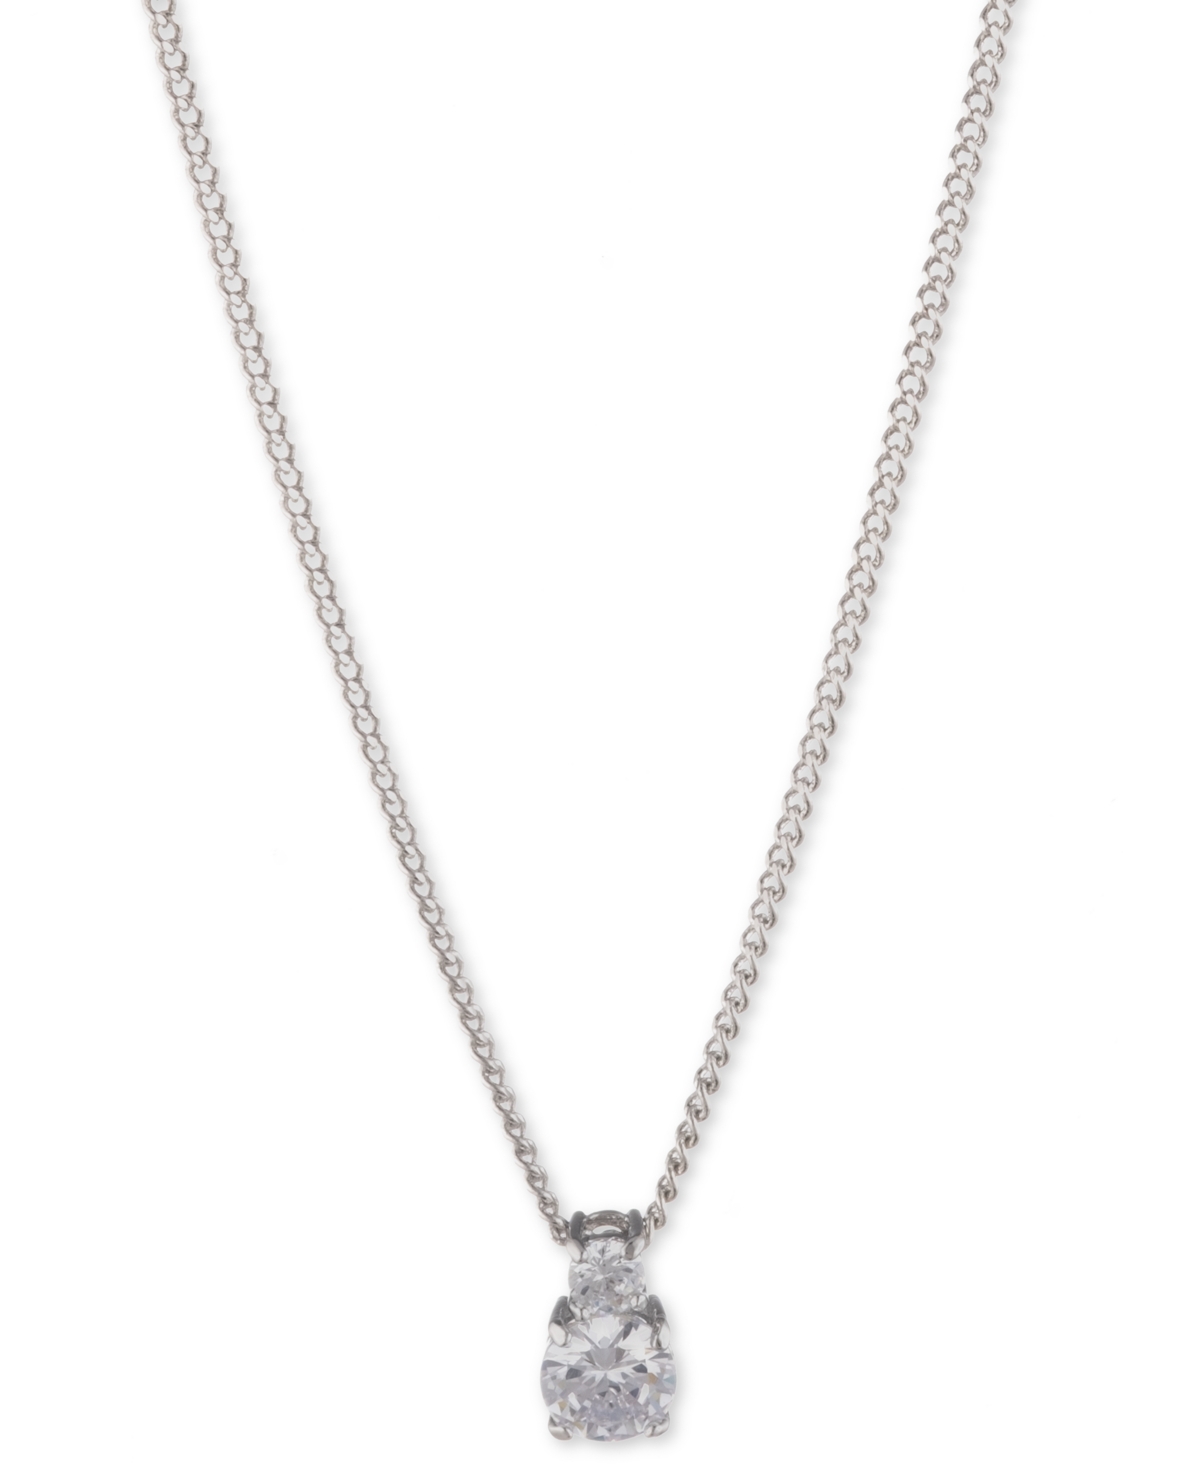 Crystal Pendant Necklace - Silver